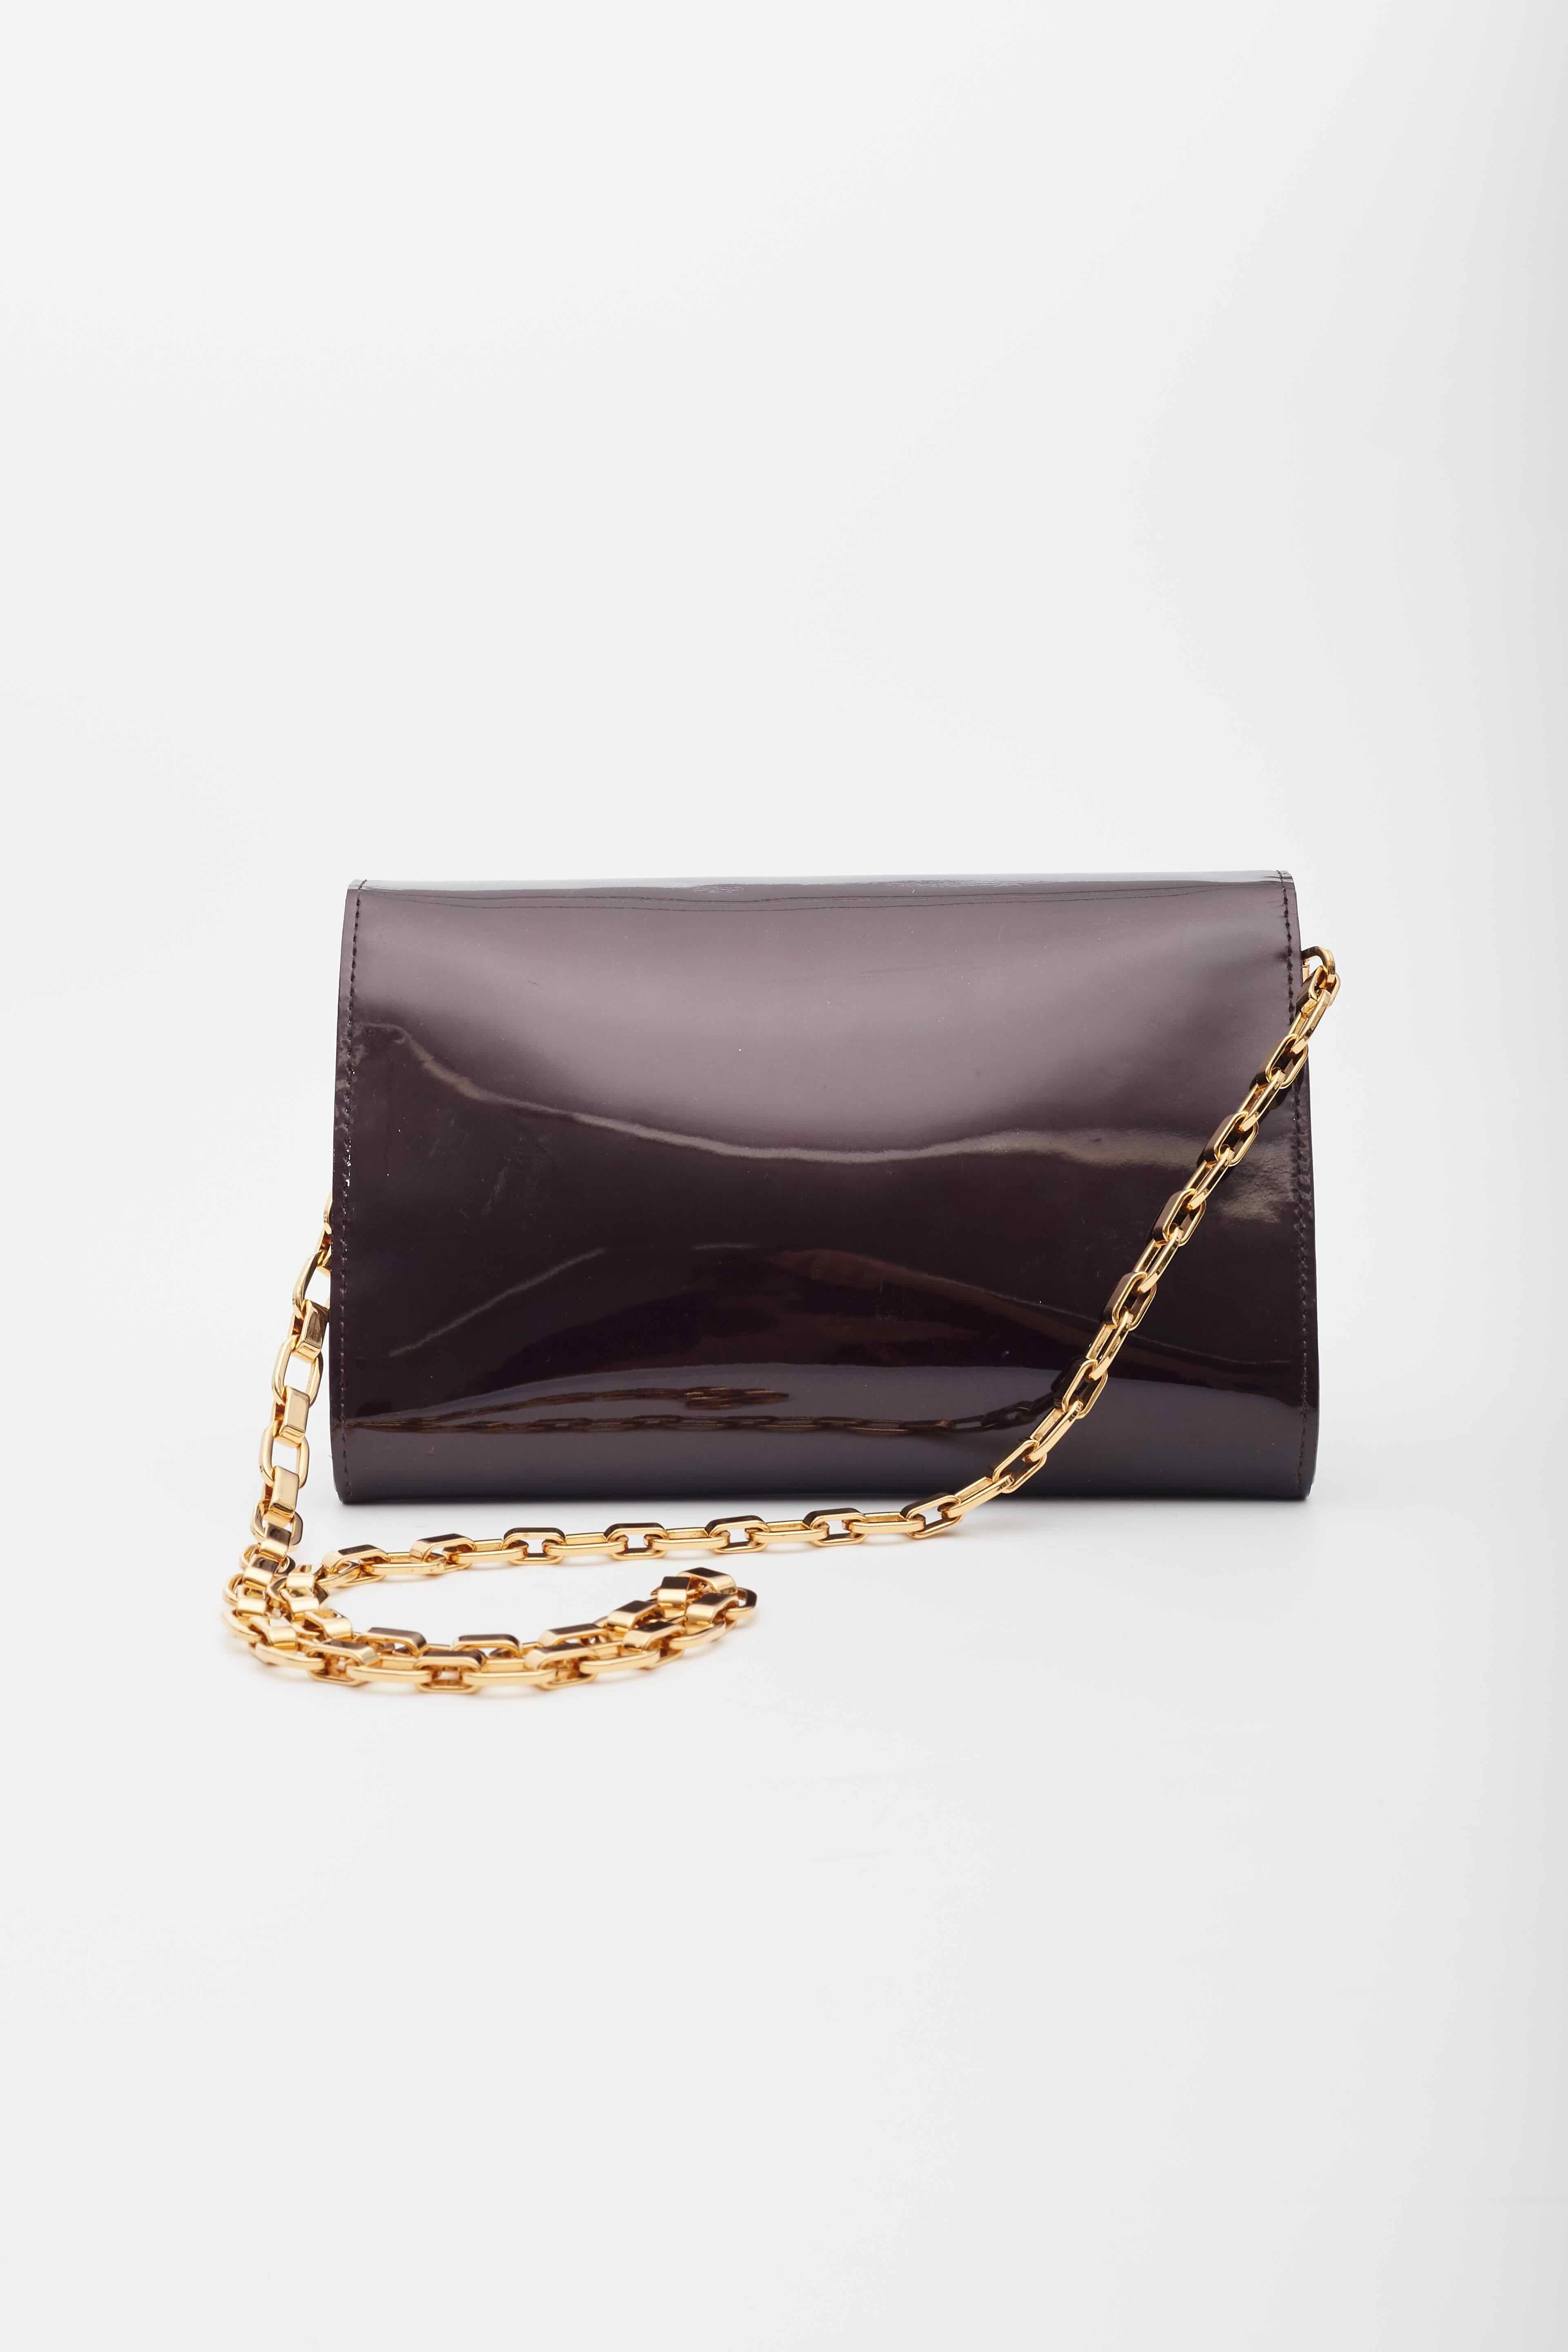 Louis Vuitton Vernis Leather Chain Louise GM Bag For Sale 6